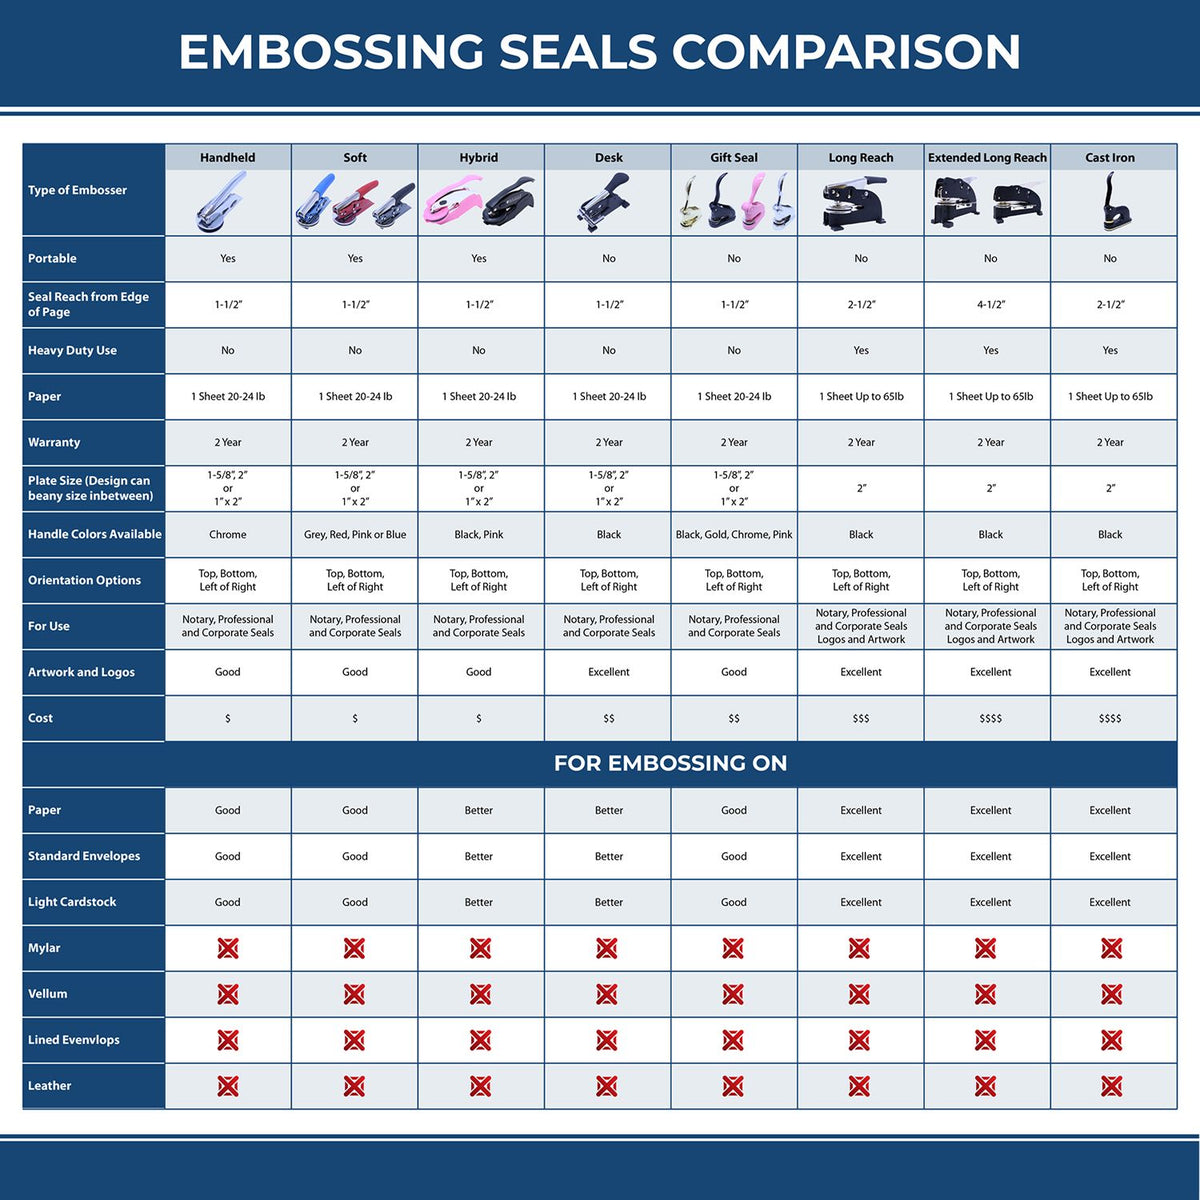 A comparison chart for the different types of mount models available for the Long Reach Michigan Land Surveyor Seal.